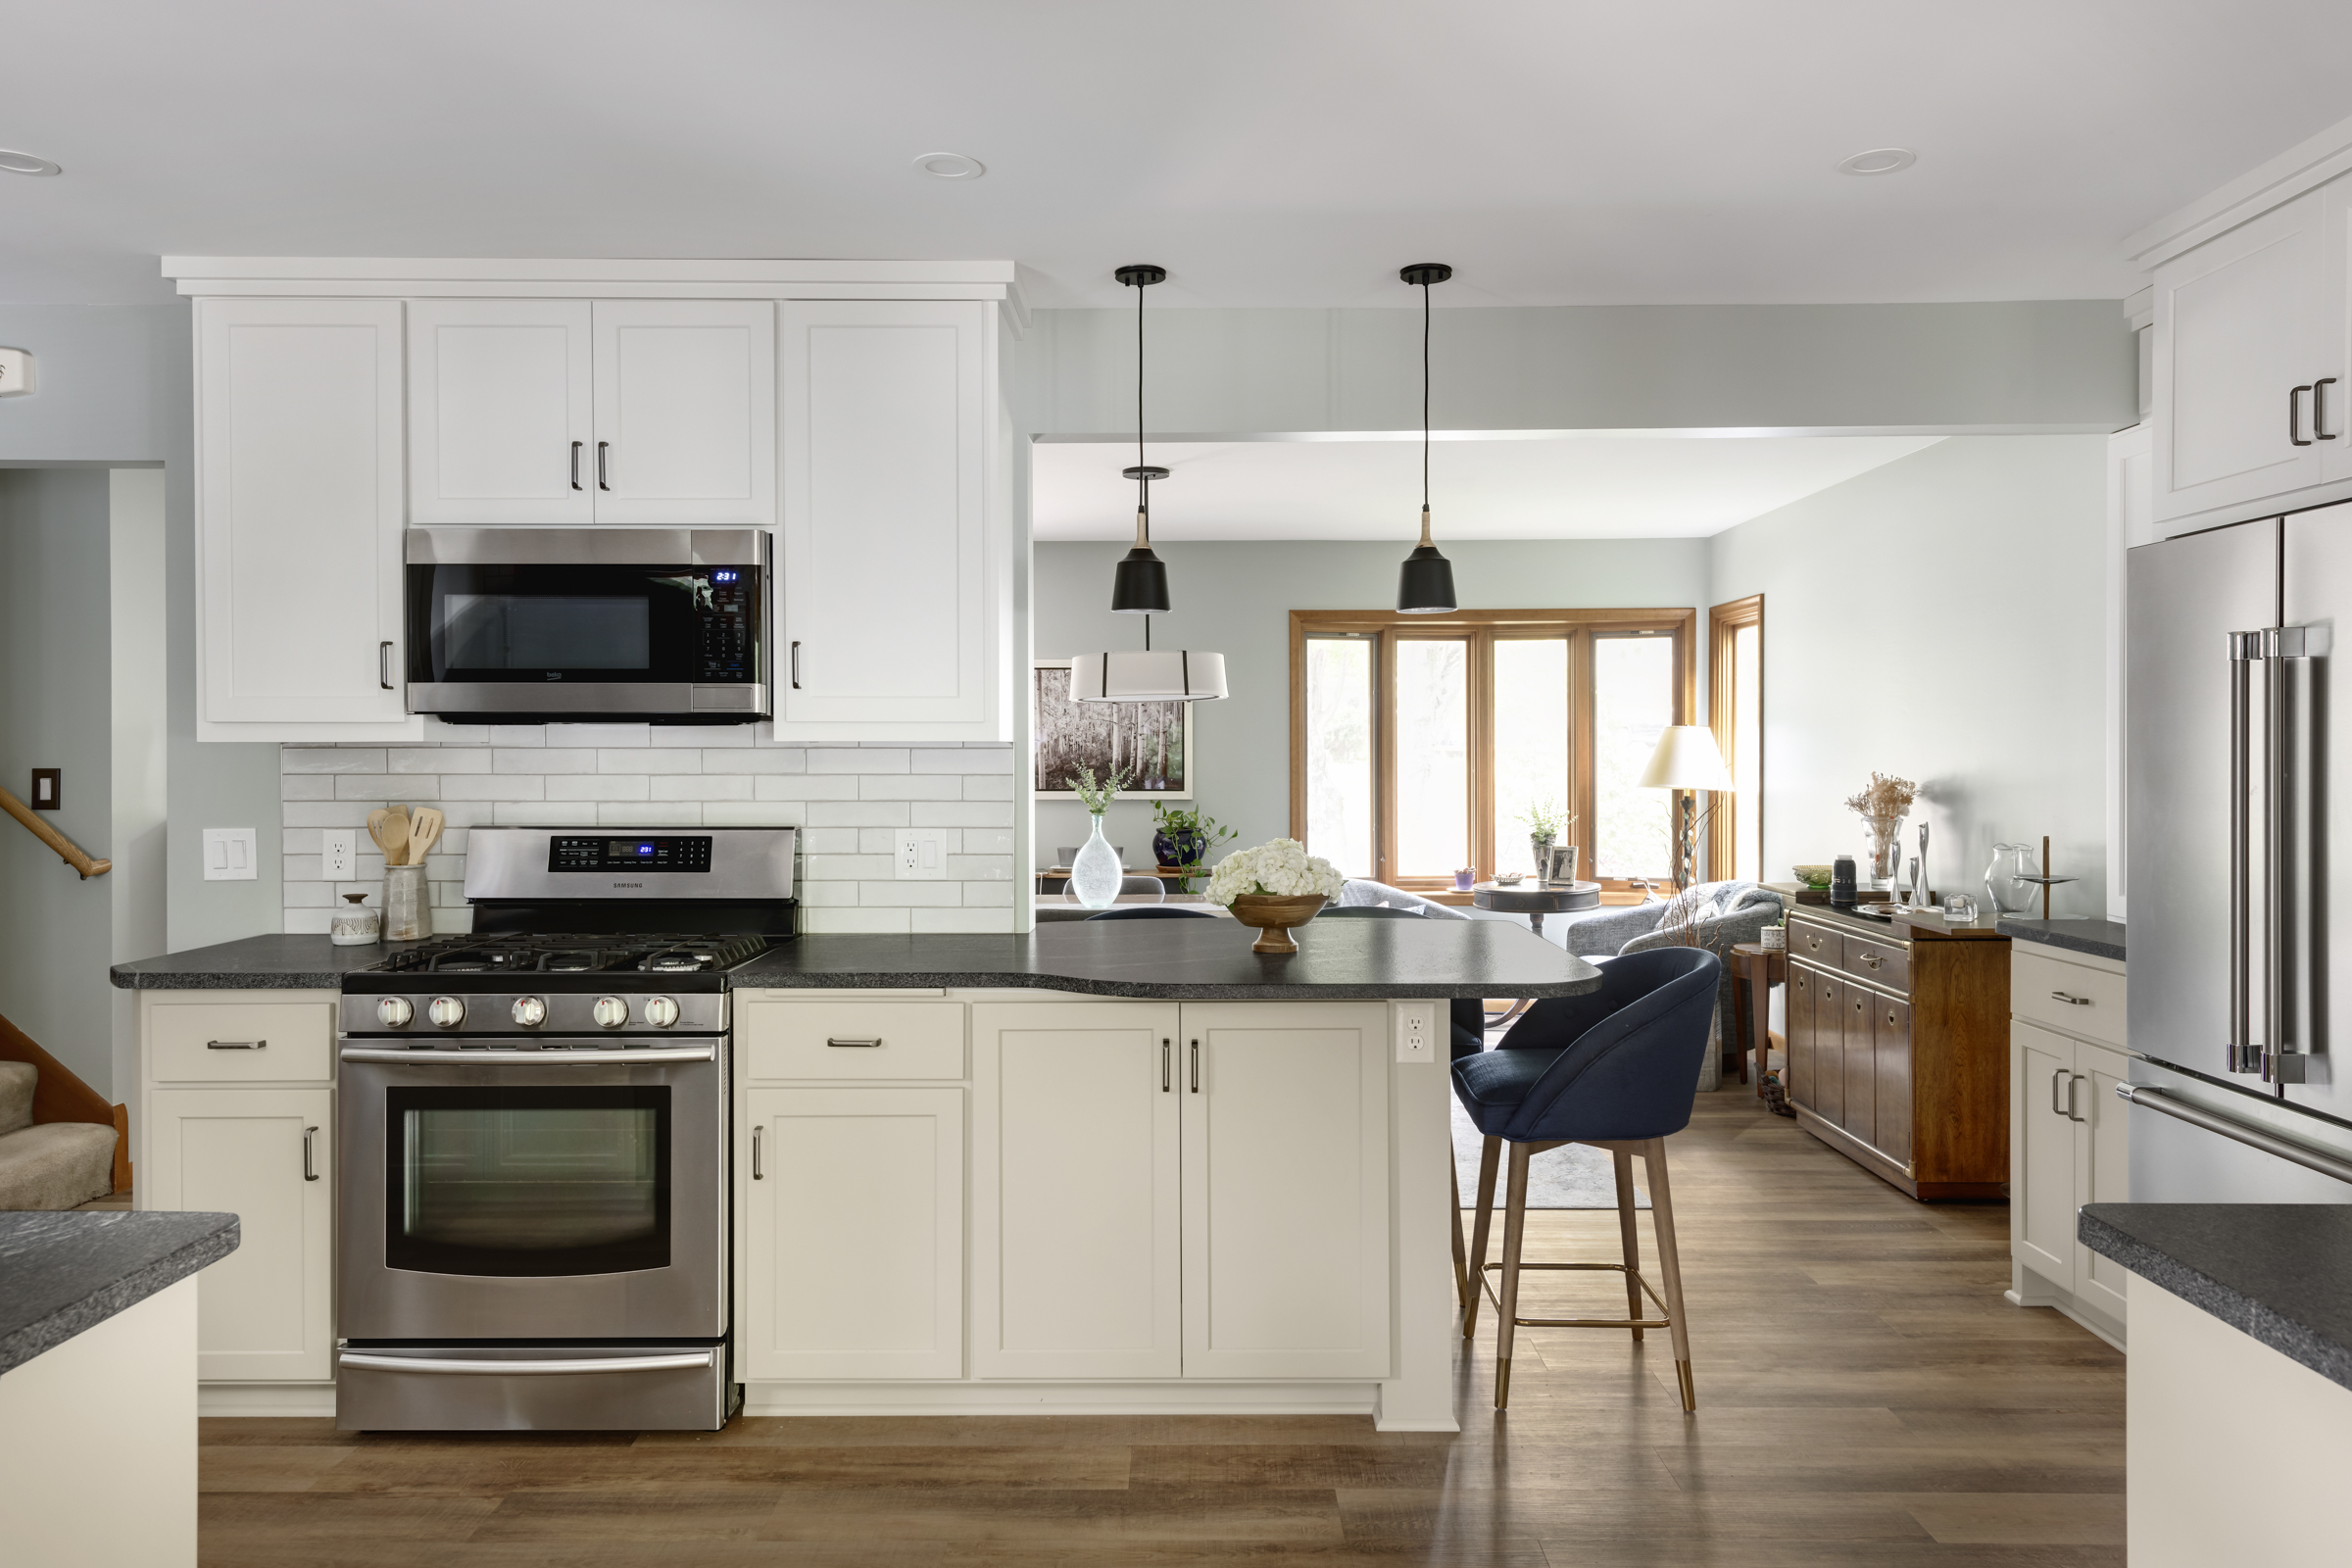 Bloomington, MN Kitchen Remodel by Twin Cities Remodeler White Birch Design